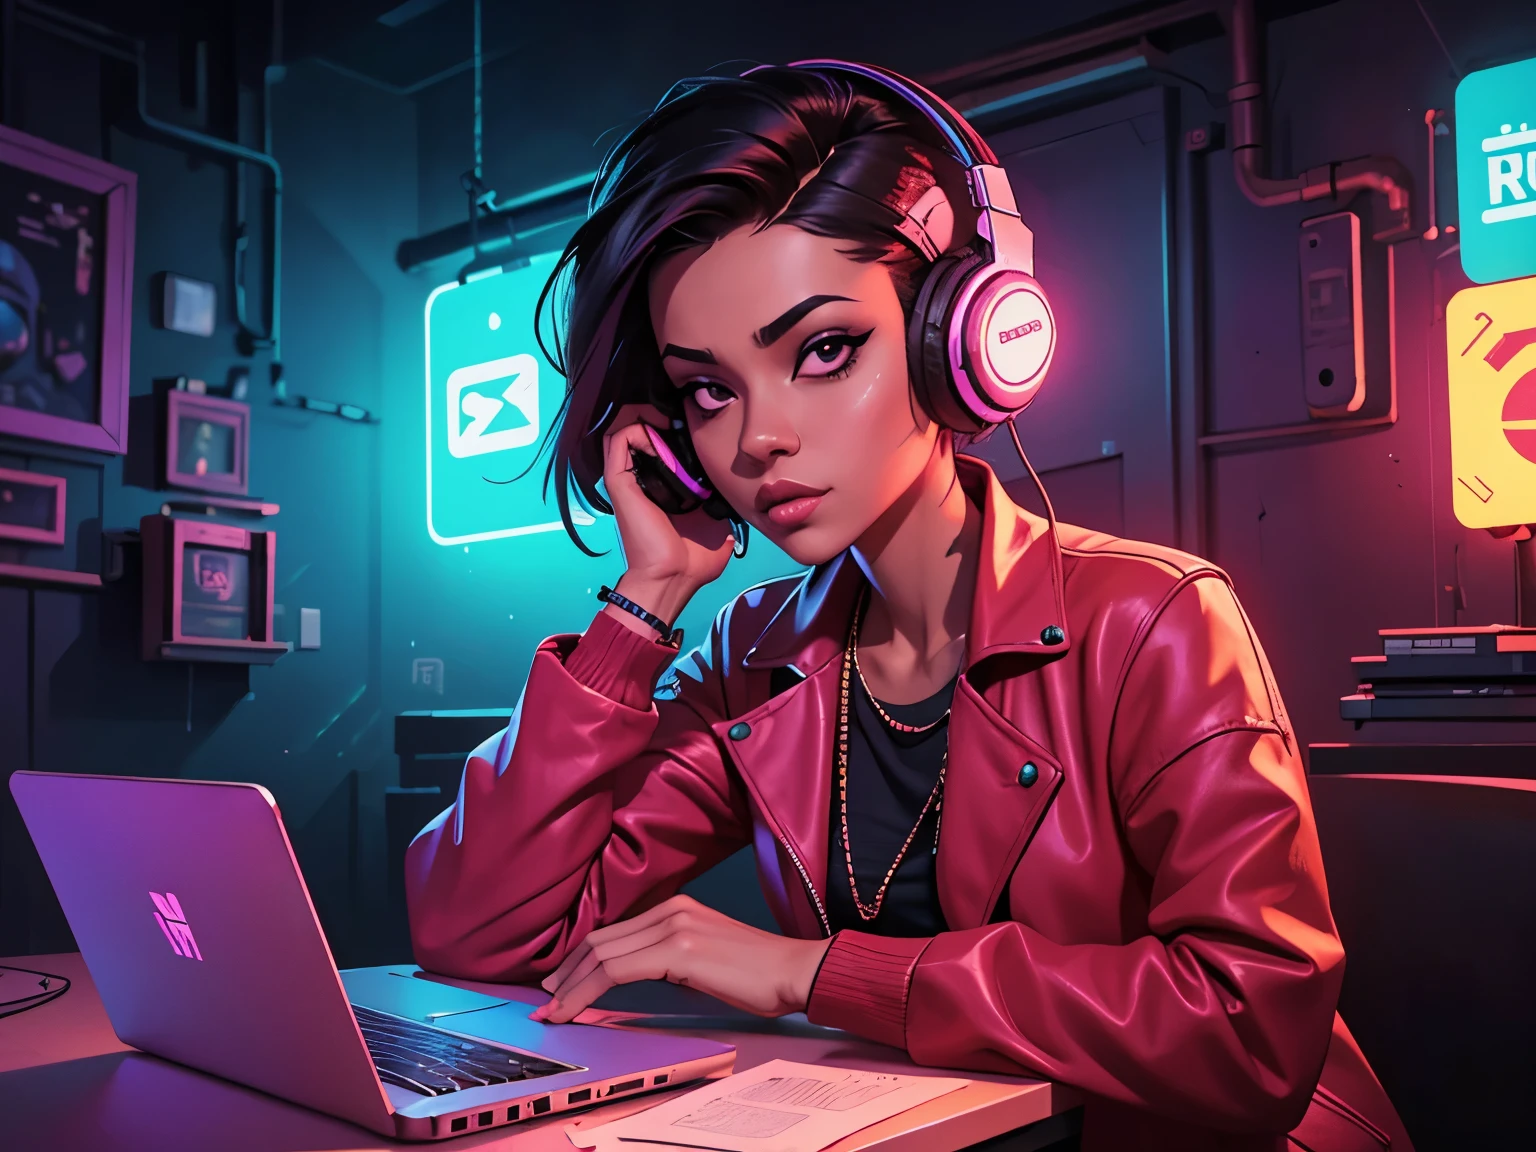 there is a light-skinned woman sitting at a table with a laptop and headphones, com os cabelos curtos e cacheados na cor marsala, com uma touca cobrindo seus cabelos no estilo anonymus, cyberpunk art inspired by Duskwood trends in urban society in Japan, arte digital, Relaxar, arte de fundo, Estilo de arte lofi, cyberpunk vibes, onda de vapor, Estilo de arte ]!!, retrato de lofi, [ Estilo de arte synthwave neon]!!